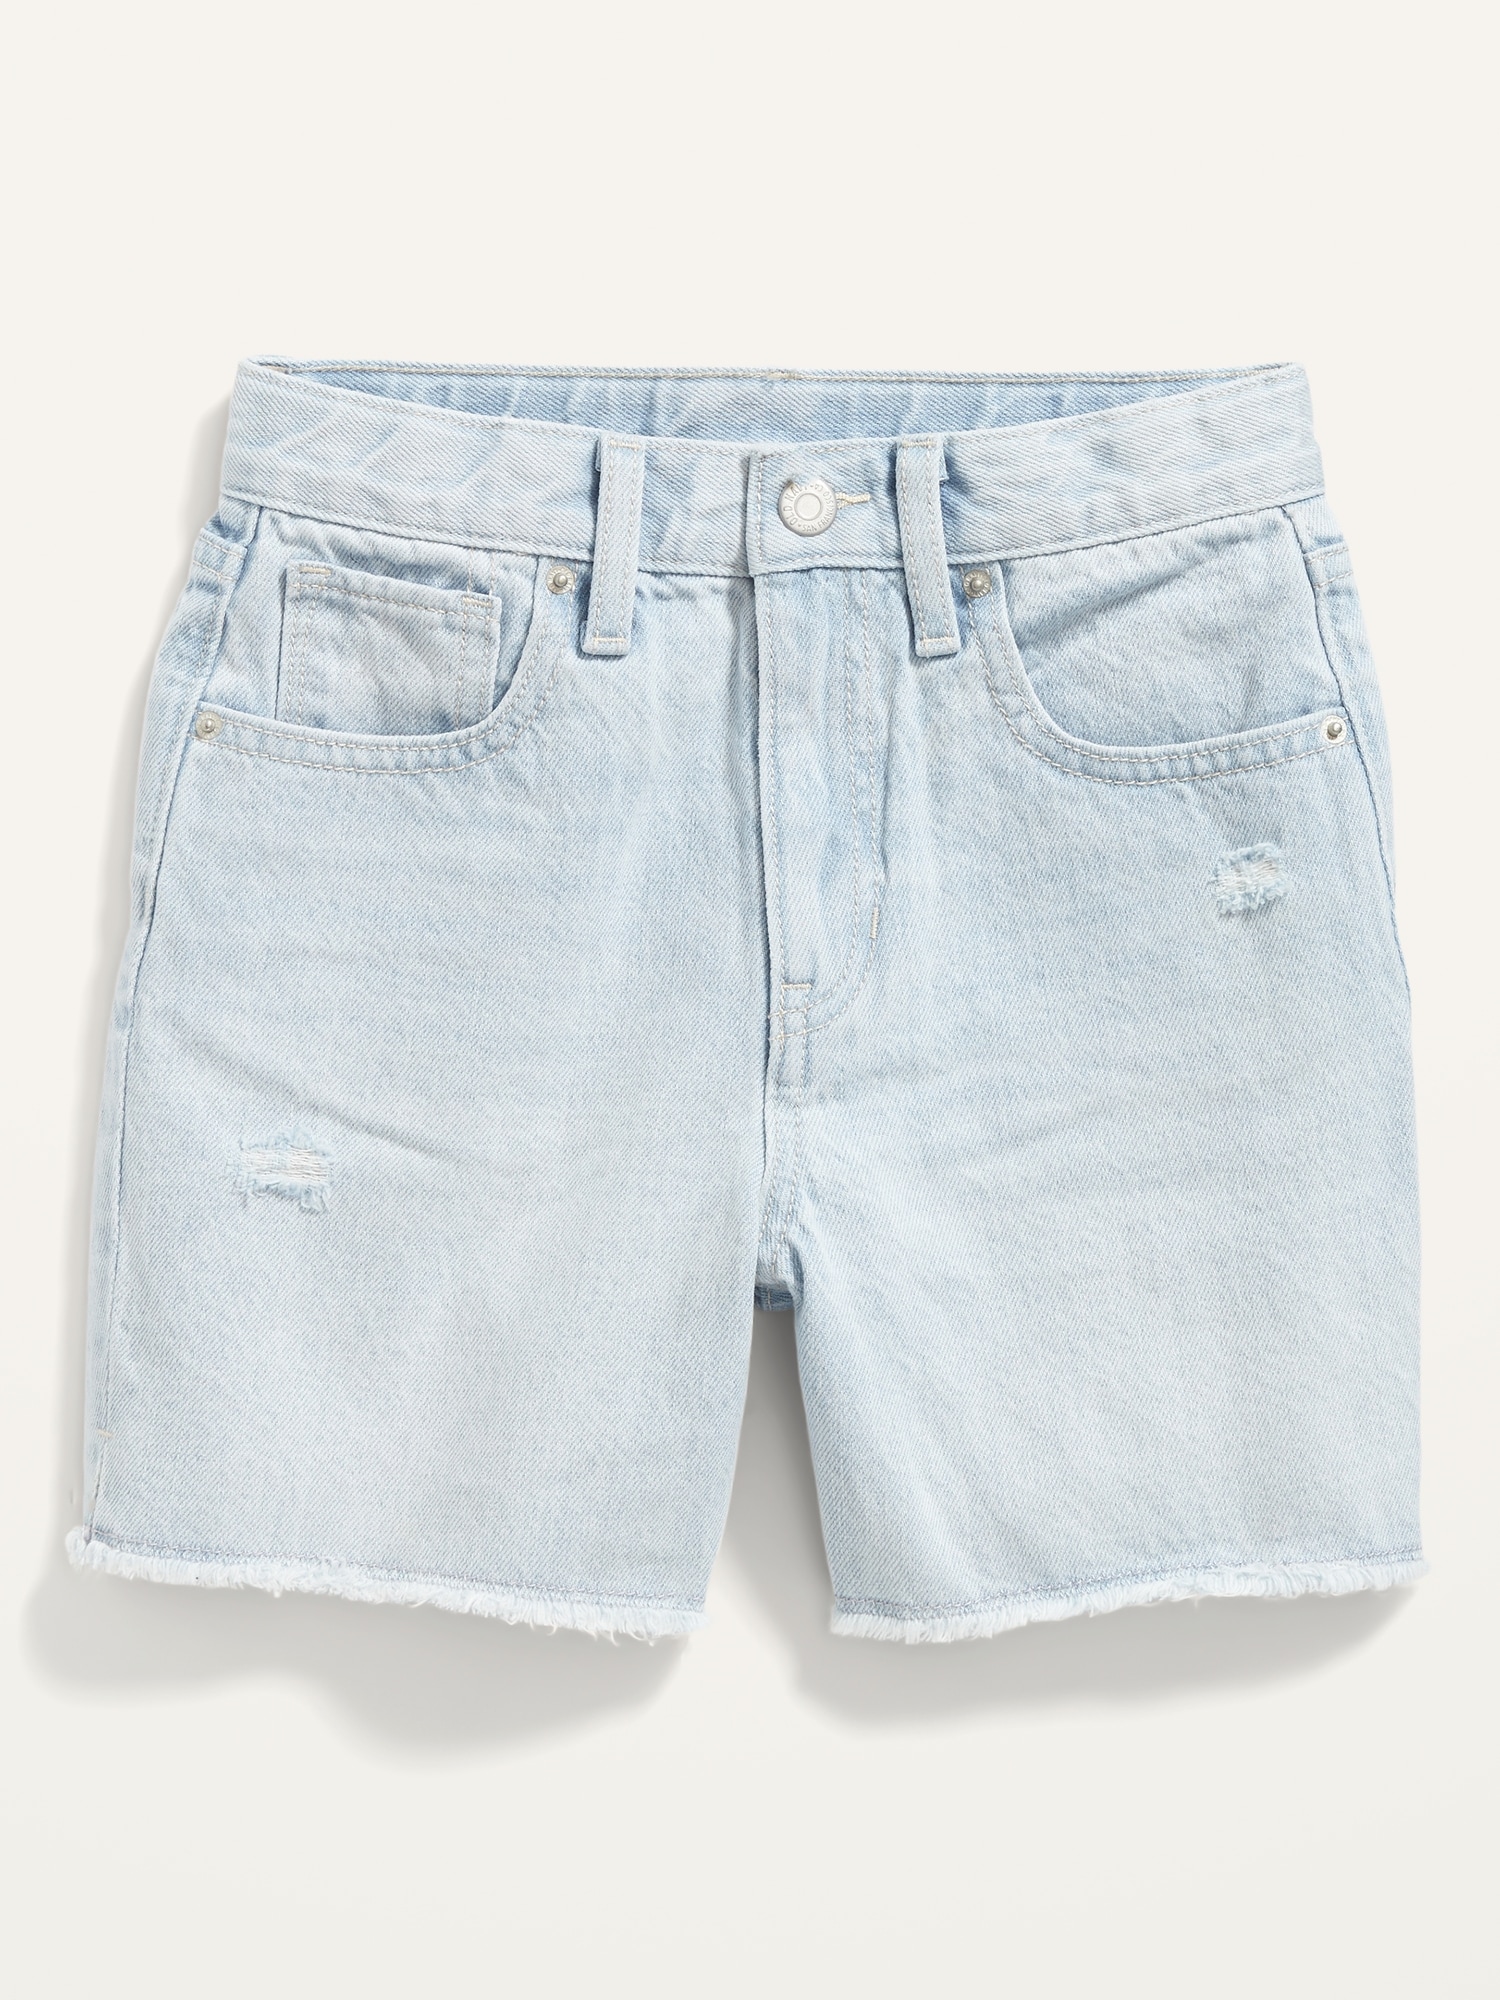 Old Navy High-Waisted Built-In Tough Ripped Jean Midi Shorts for Girls blue. 1